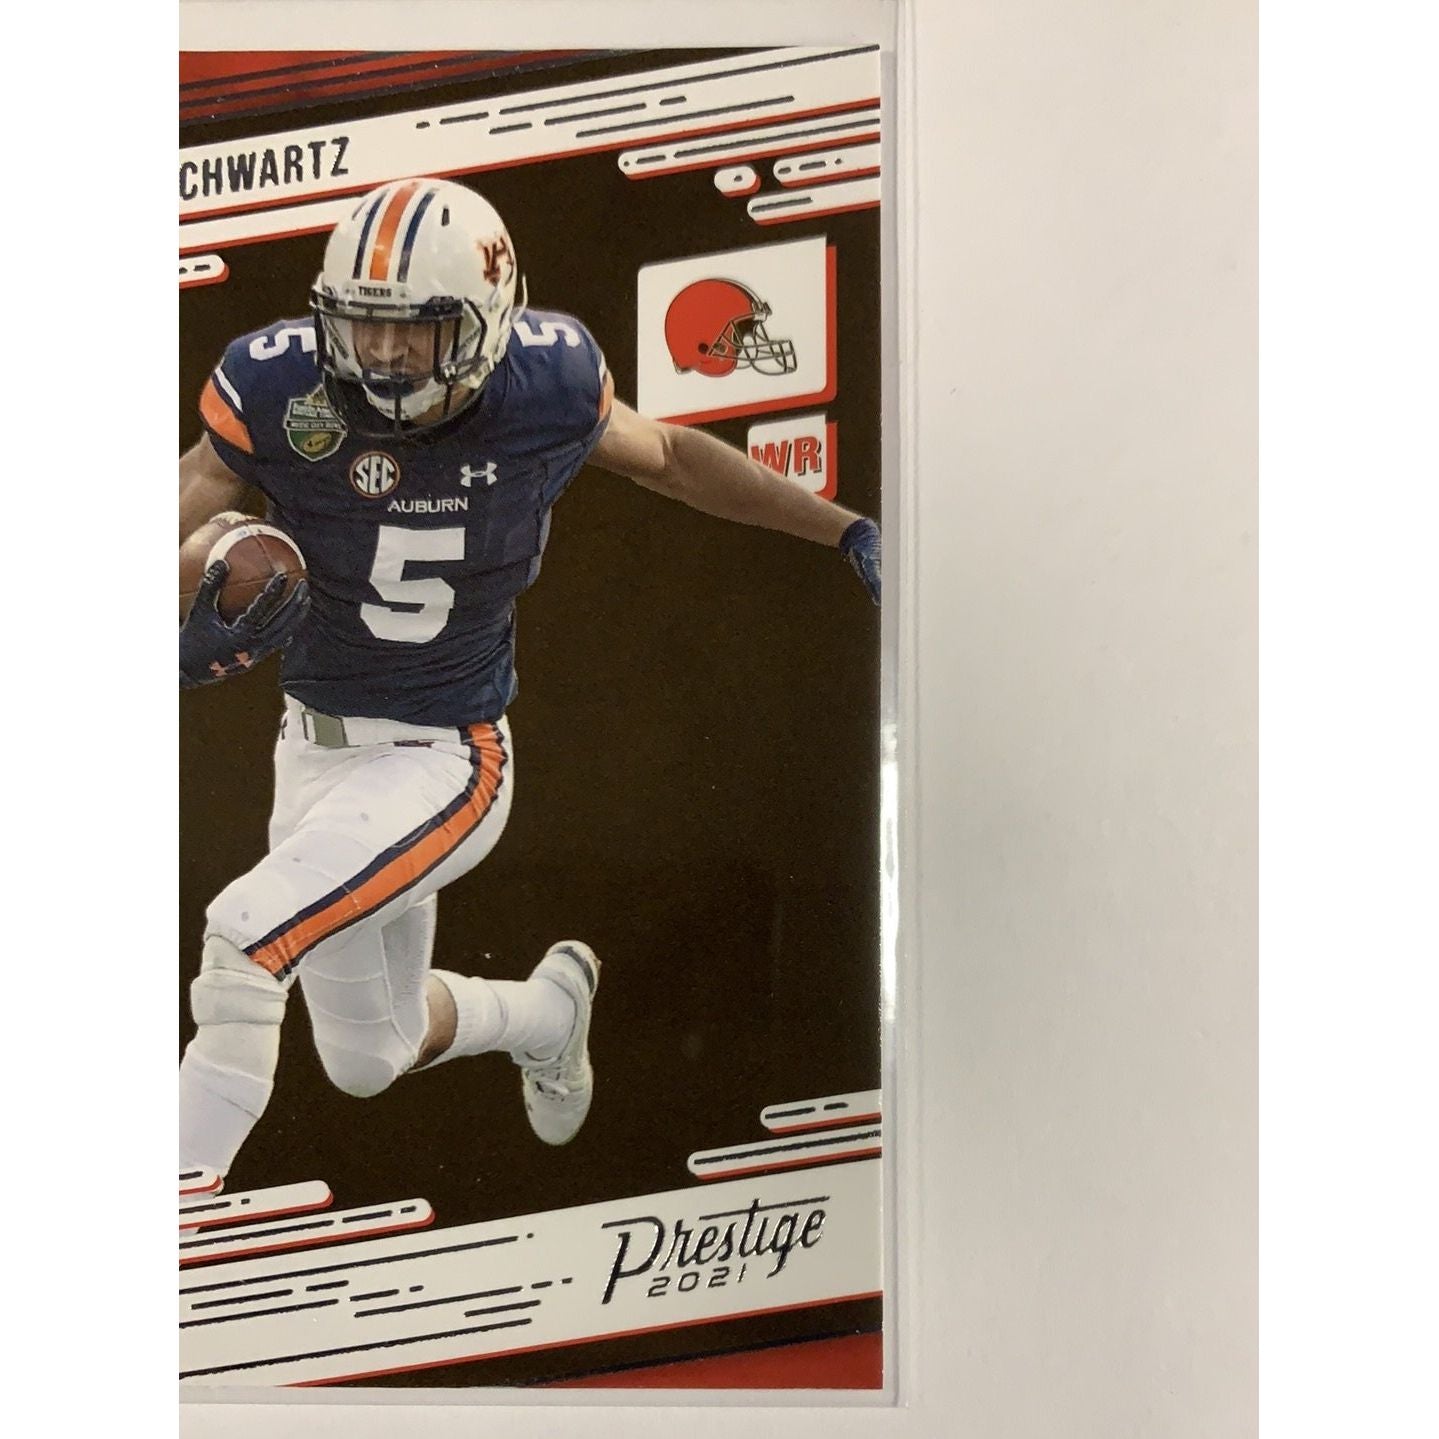  2021 Panini Prestige Anthony Schwartz RC  Local Legends Cards & Collectibles